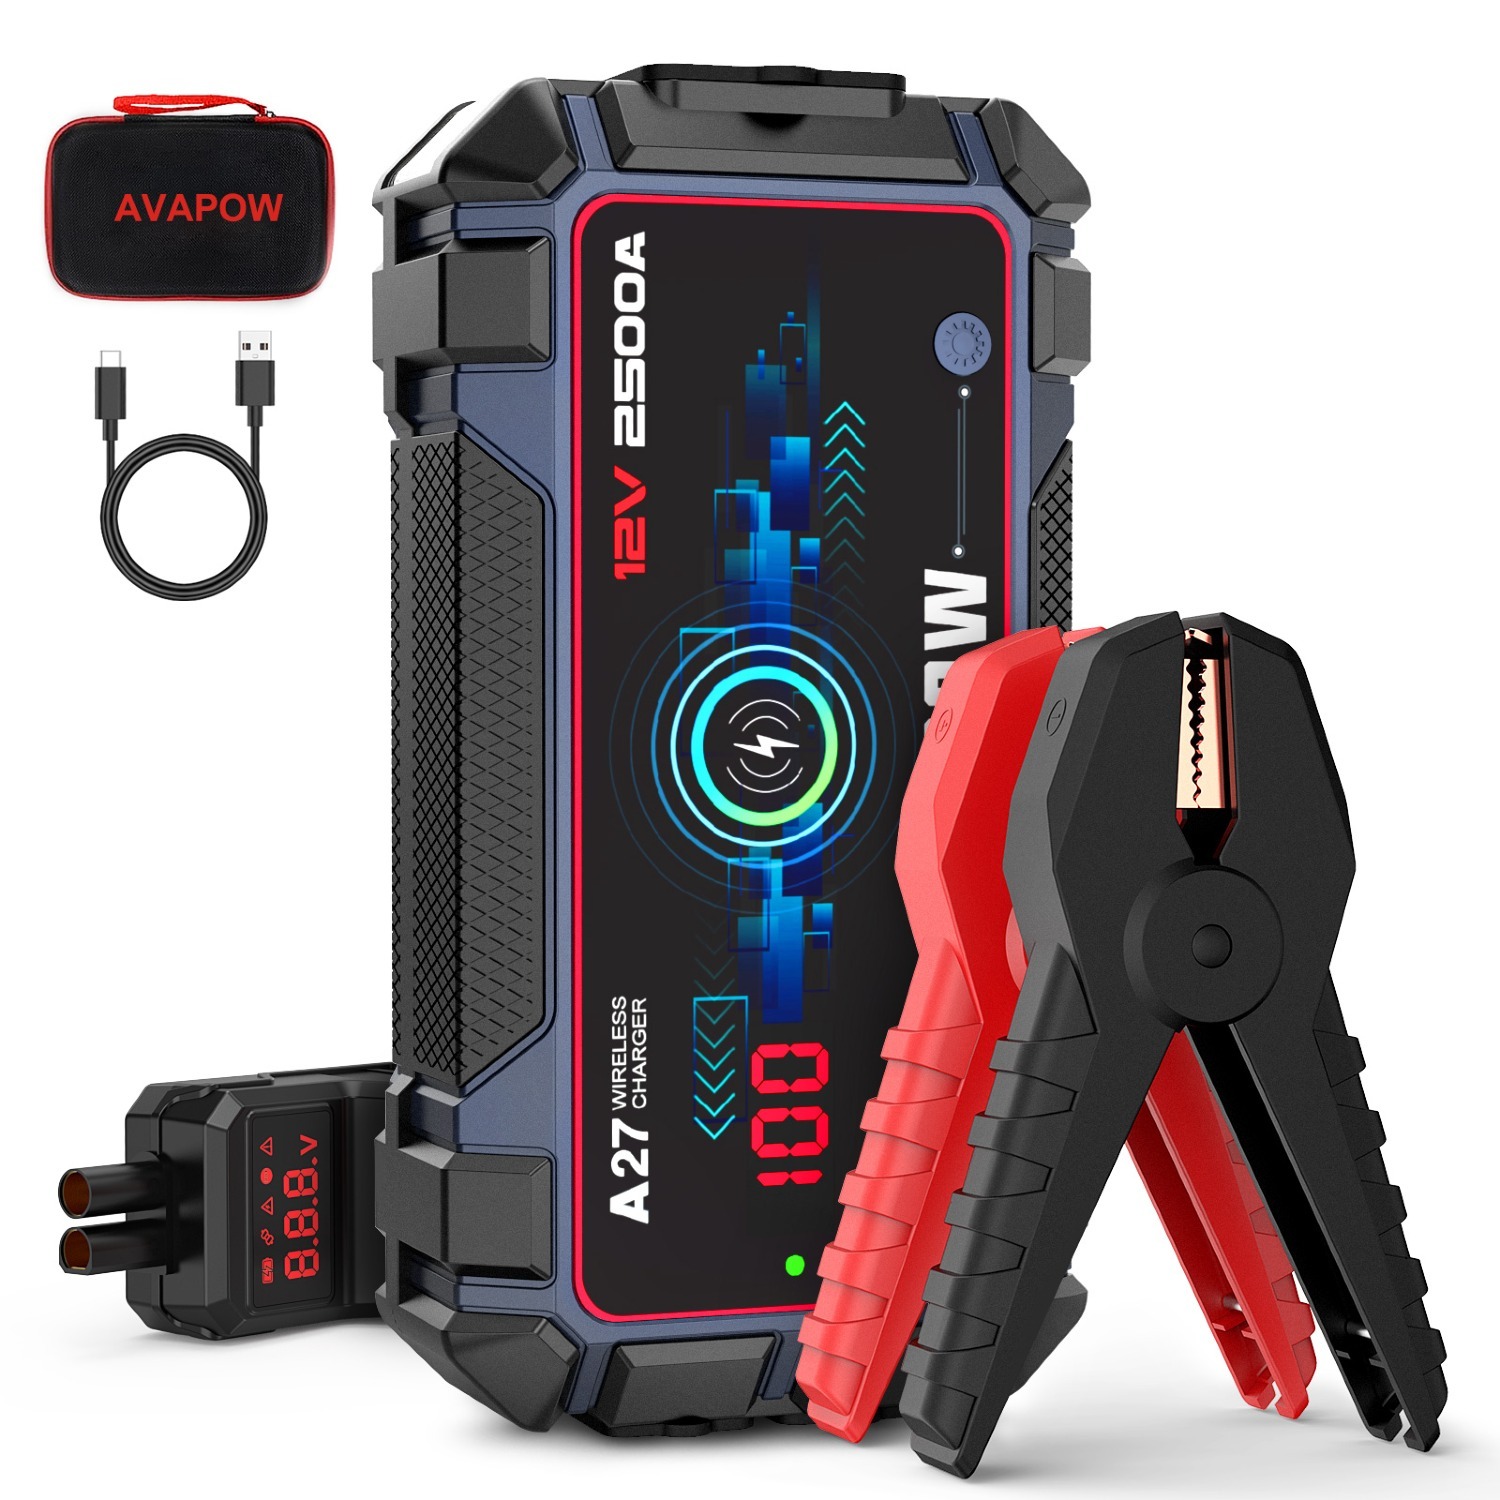 AVAPOW 2500A 12V Car Battery Jump Starter w/ Flashlight & USB QC3 Charging (Up to 8L Gas 8L Diesel Engine) $42 + Free Shipping